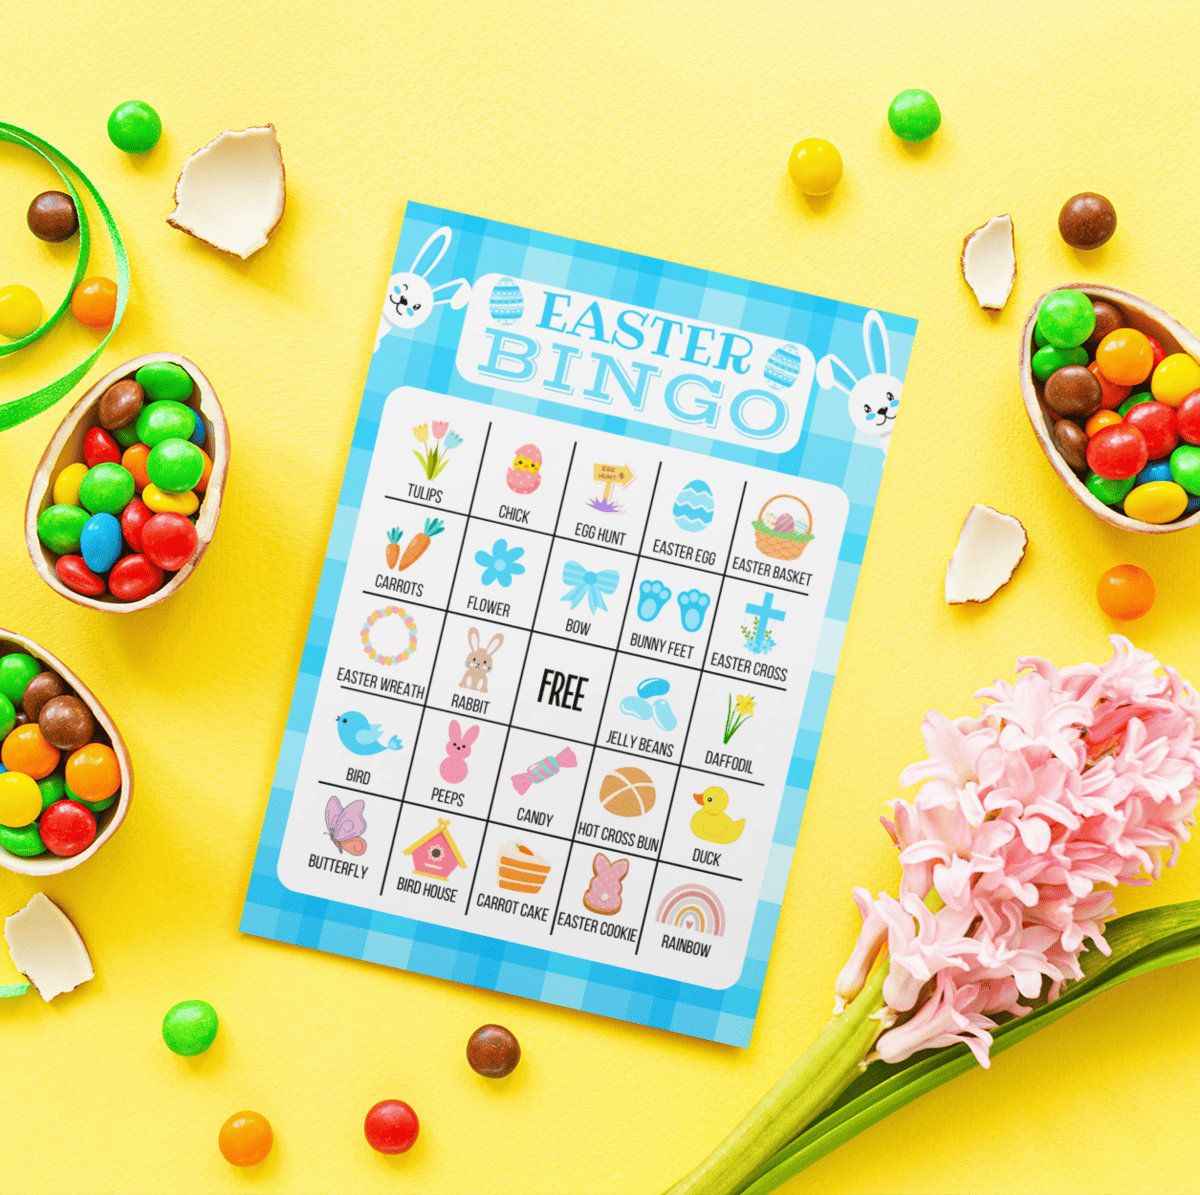 free printable easter bingo cards on yellow background with easter M&Ms and flowers